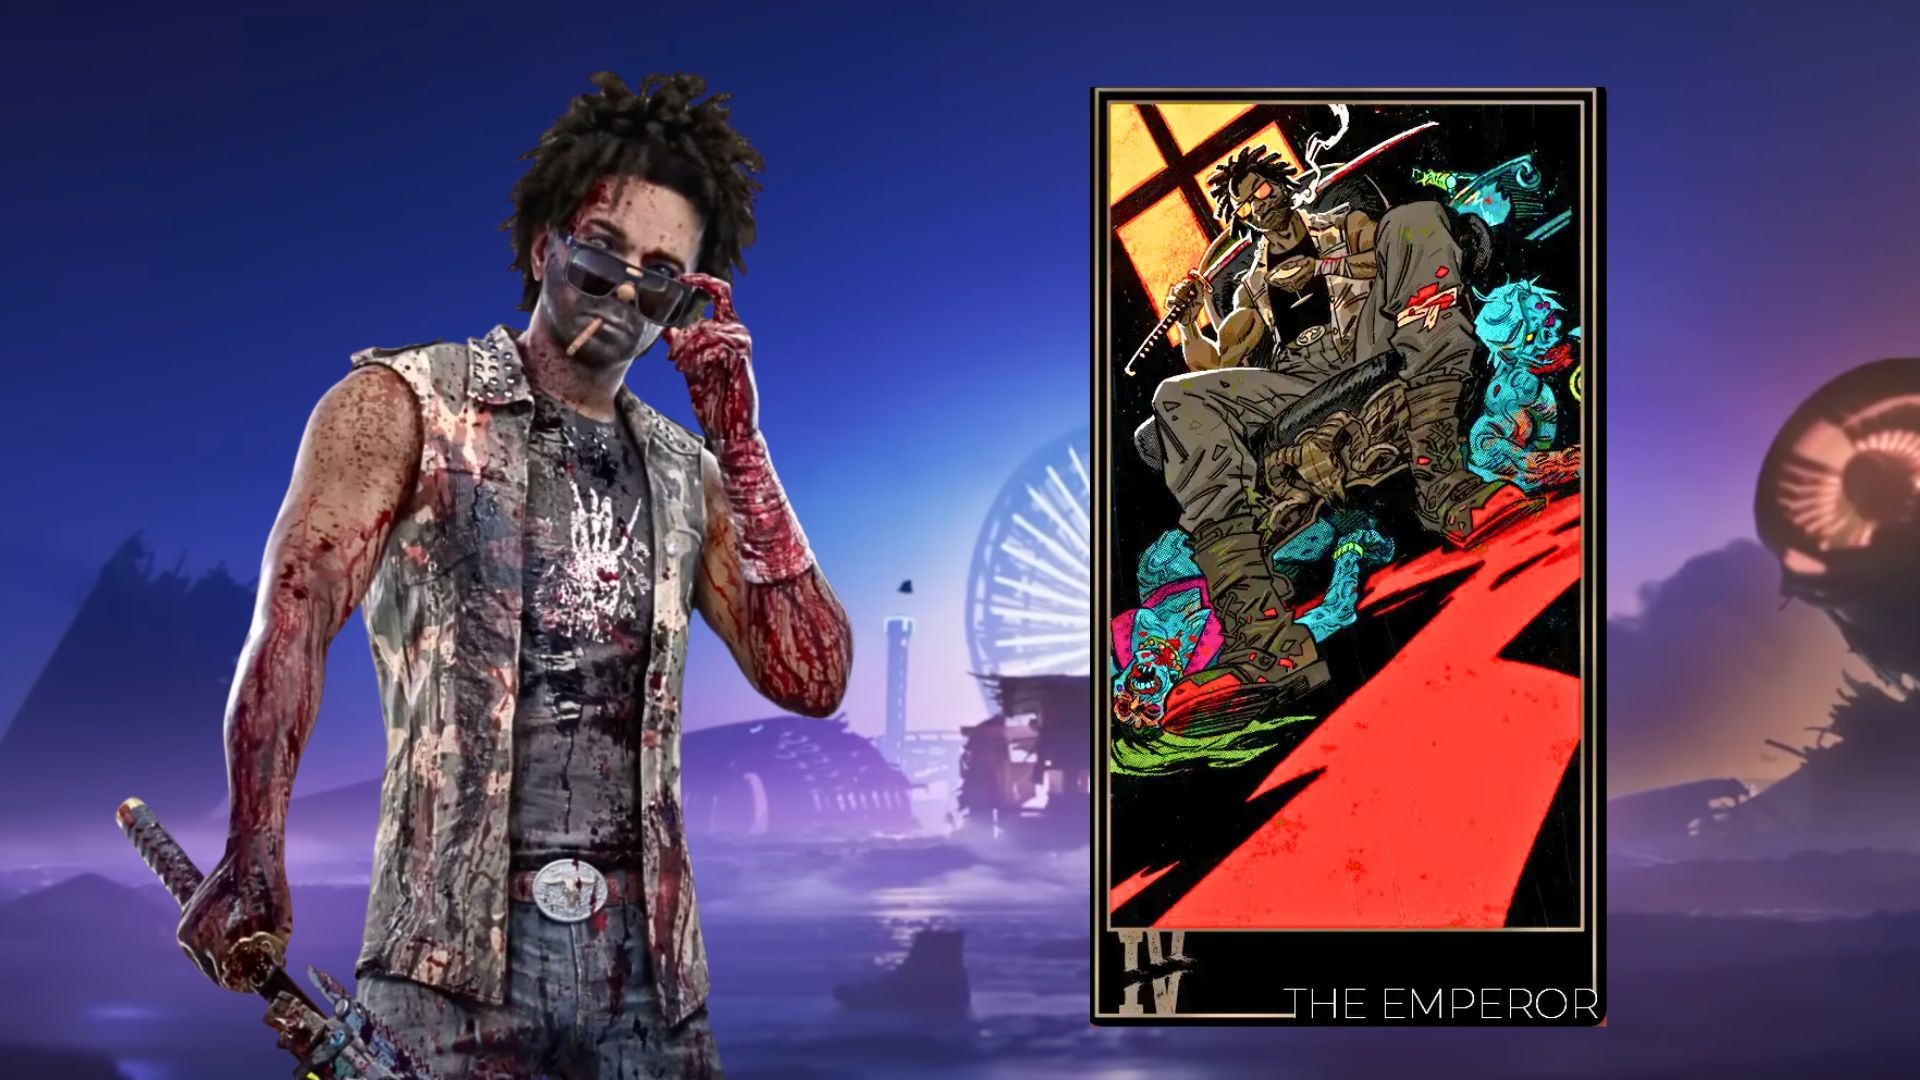 Jacob Character Image and Card from Dead Island 2